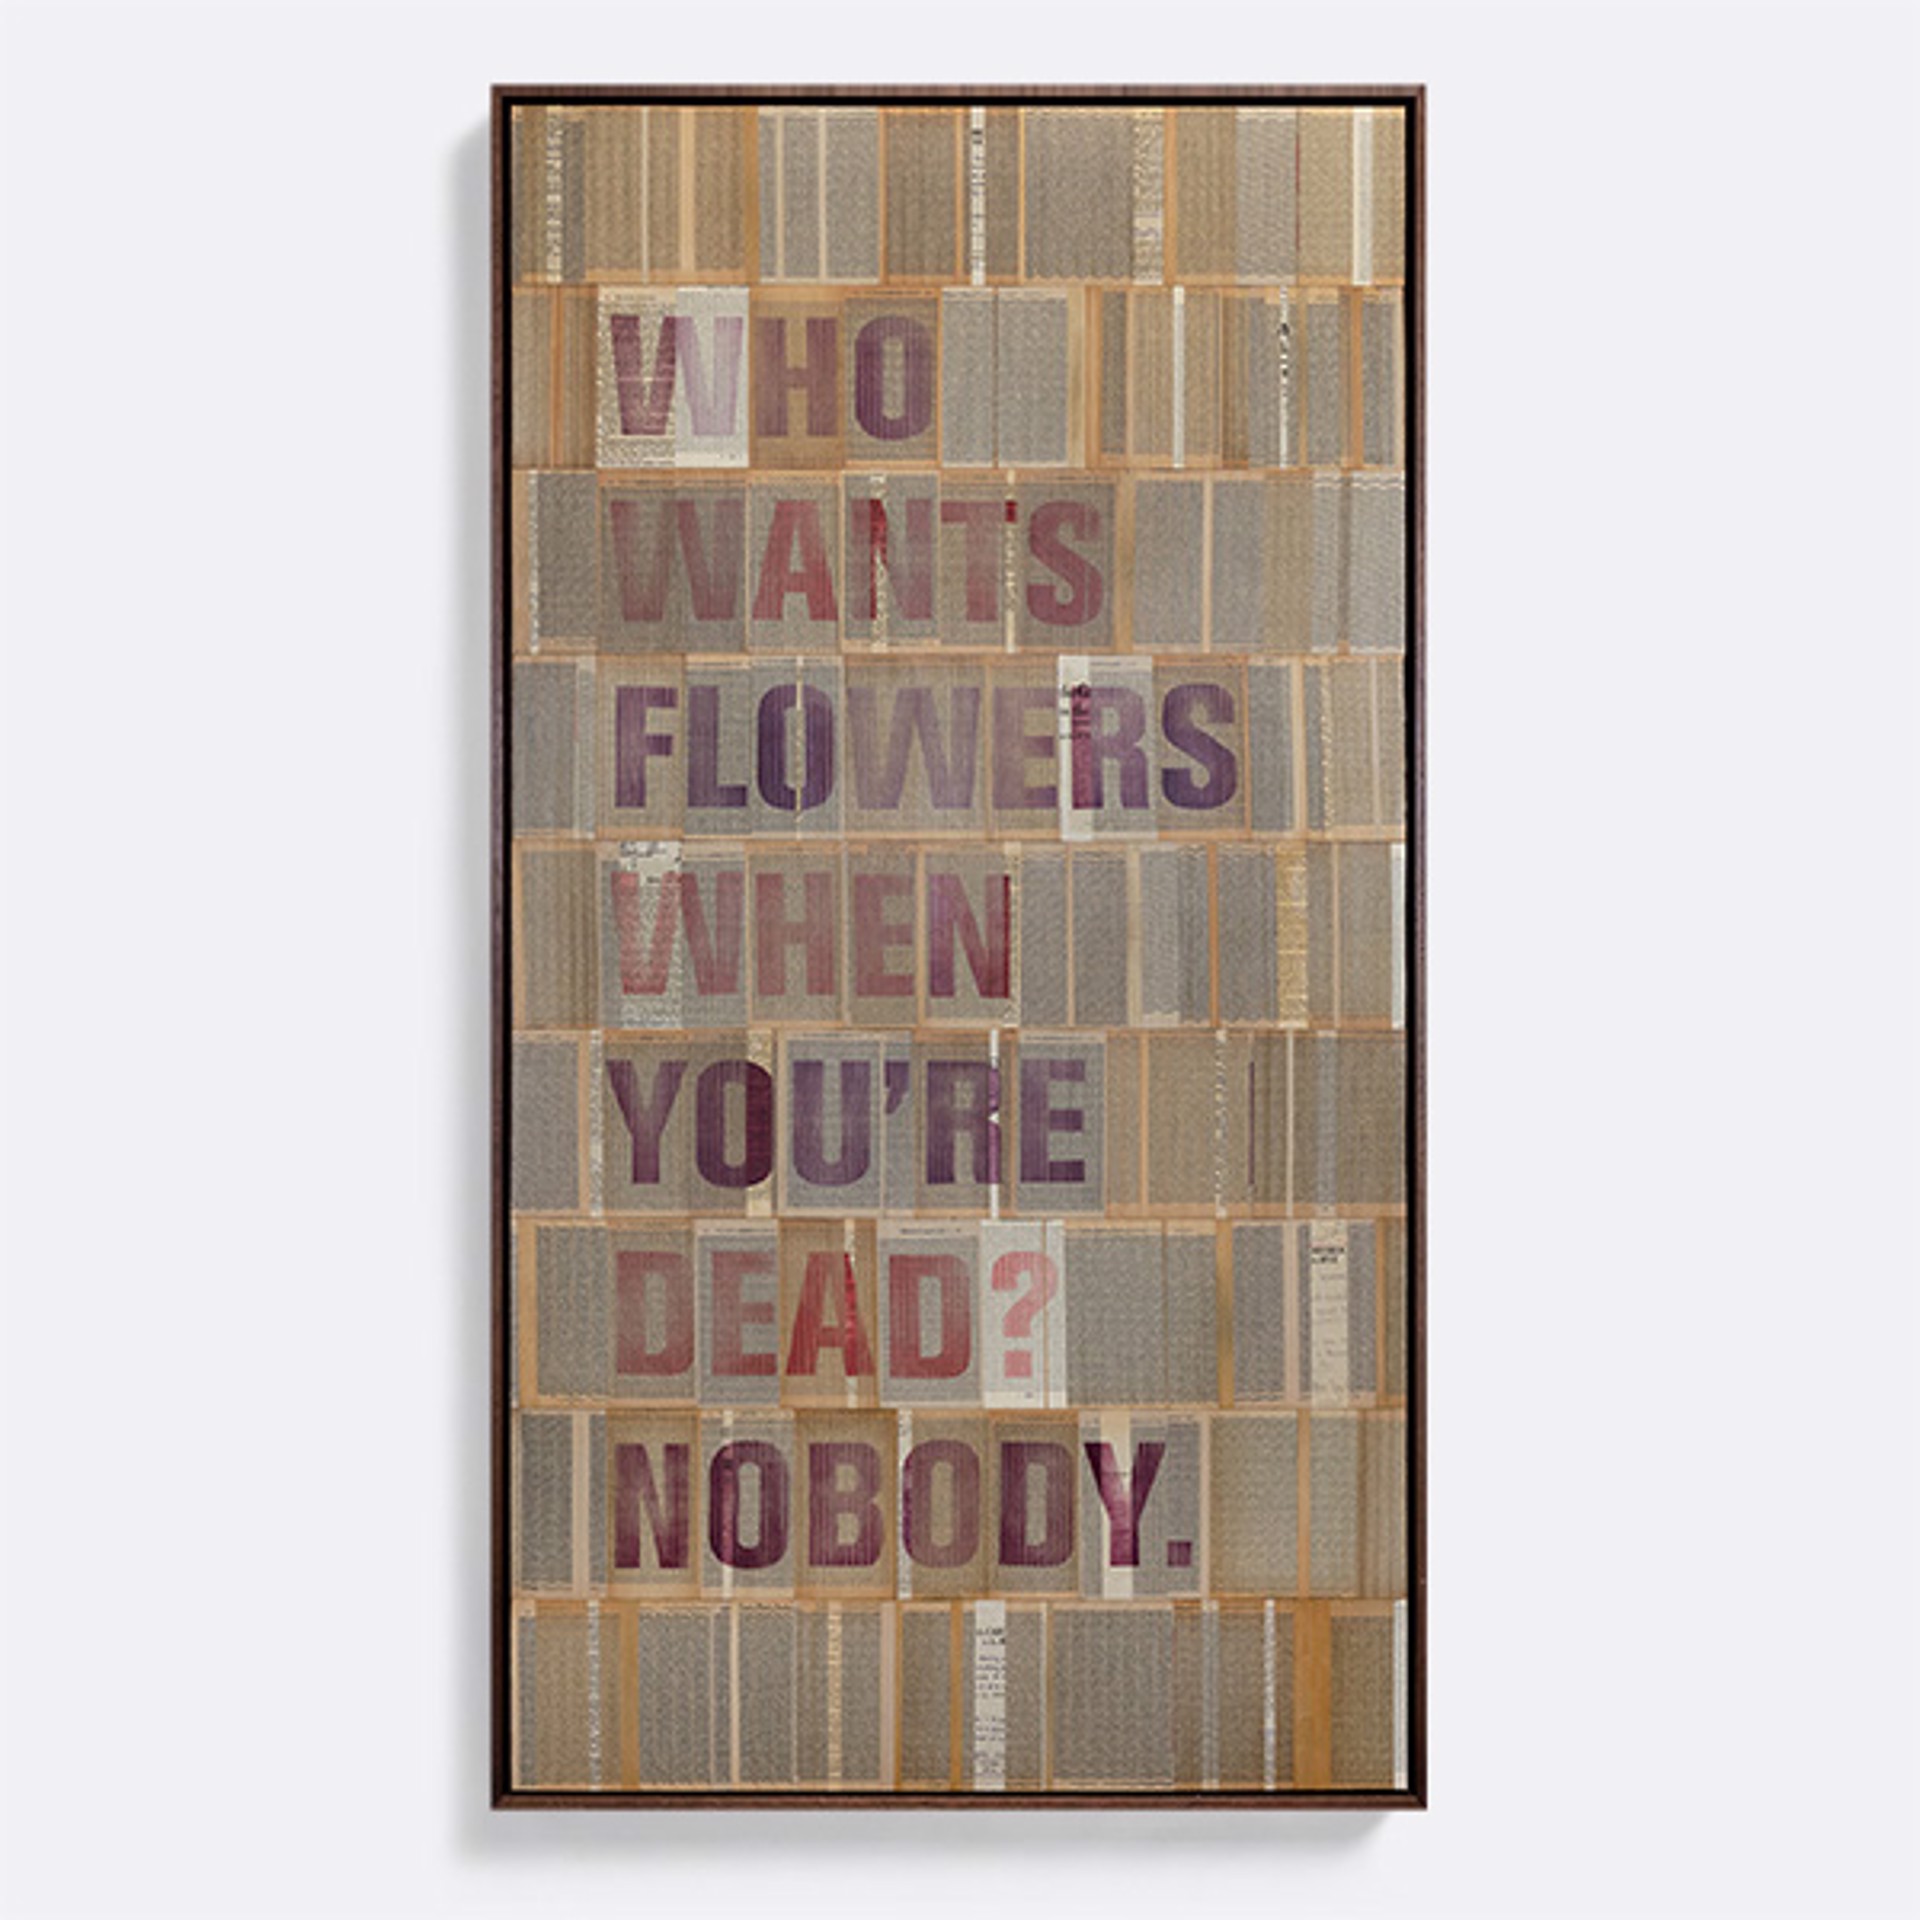 Who wants flowers when your'e dead? Nobody. by Brian Singer